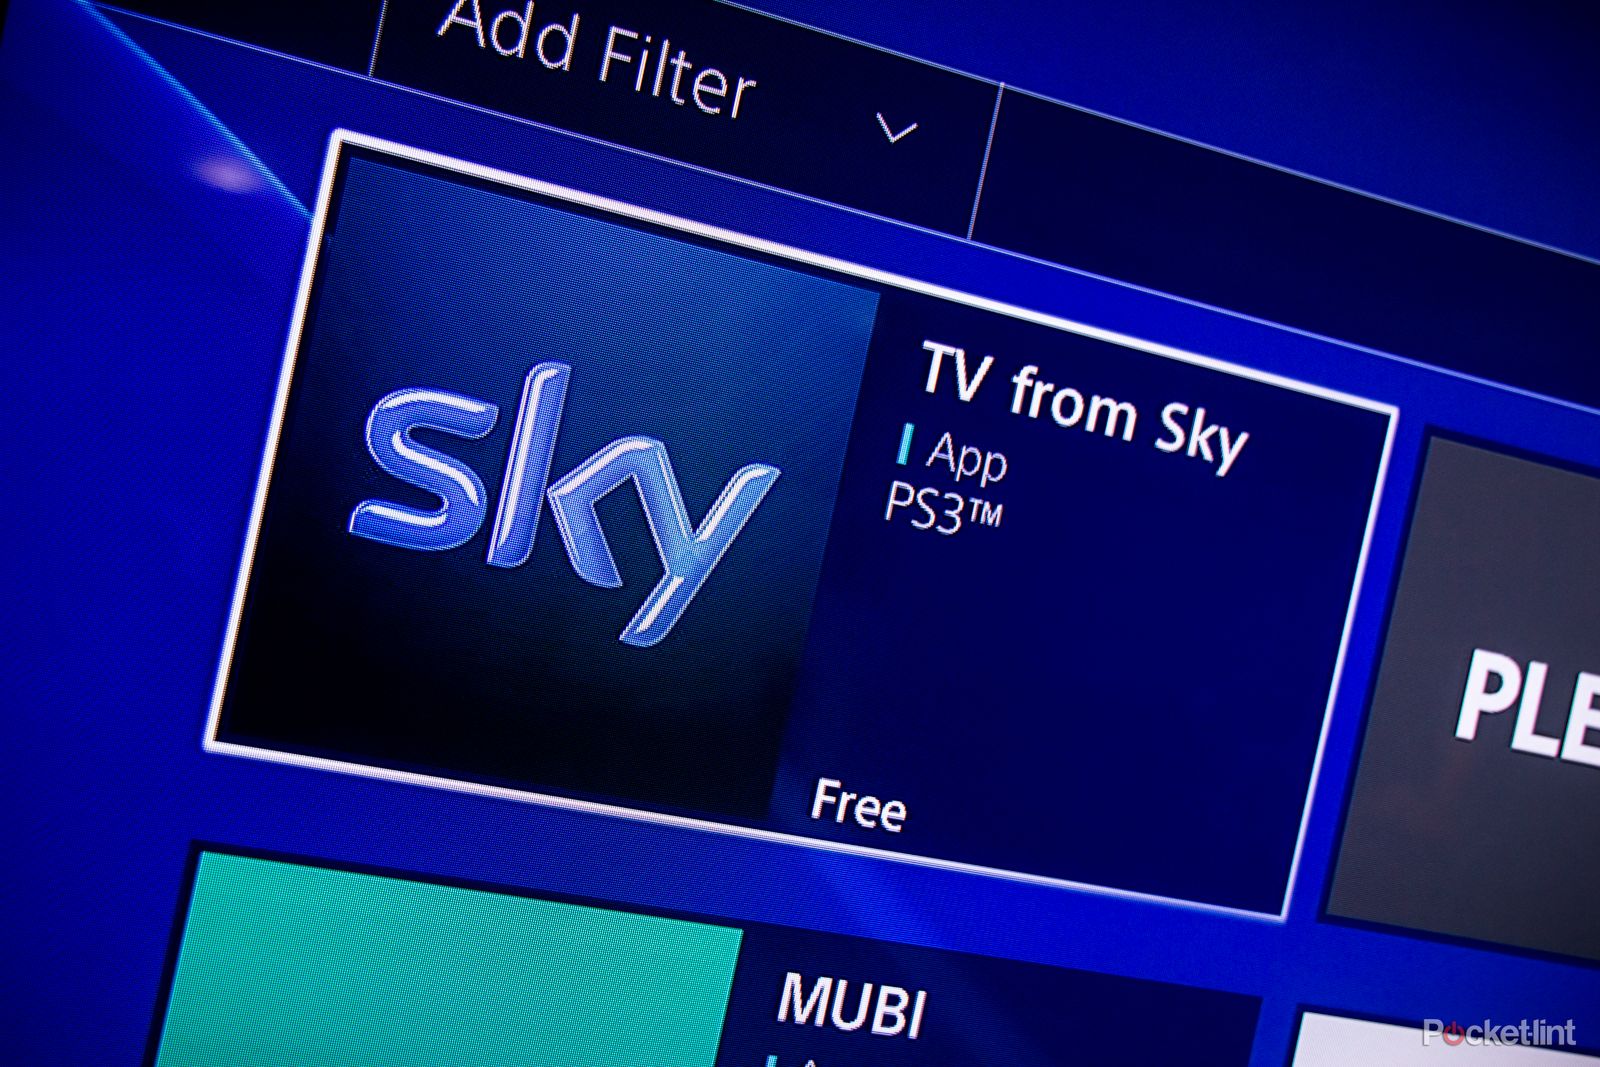 sky go now available for ps3 owners too tv from sky app in playstation store image 1